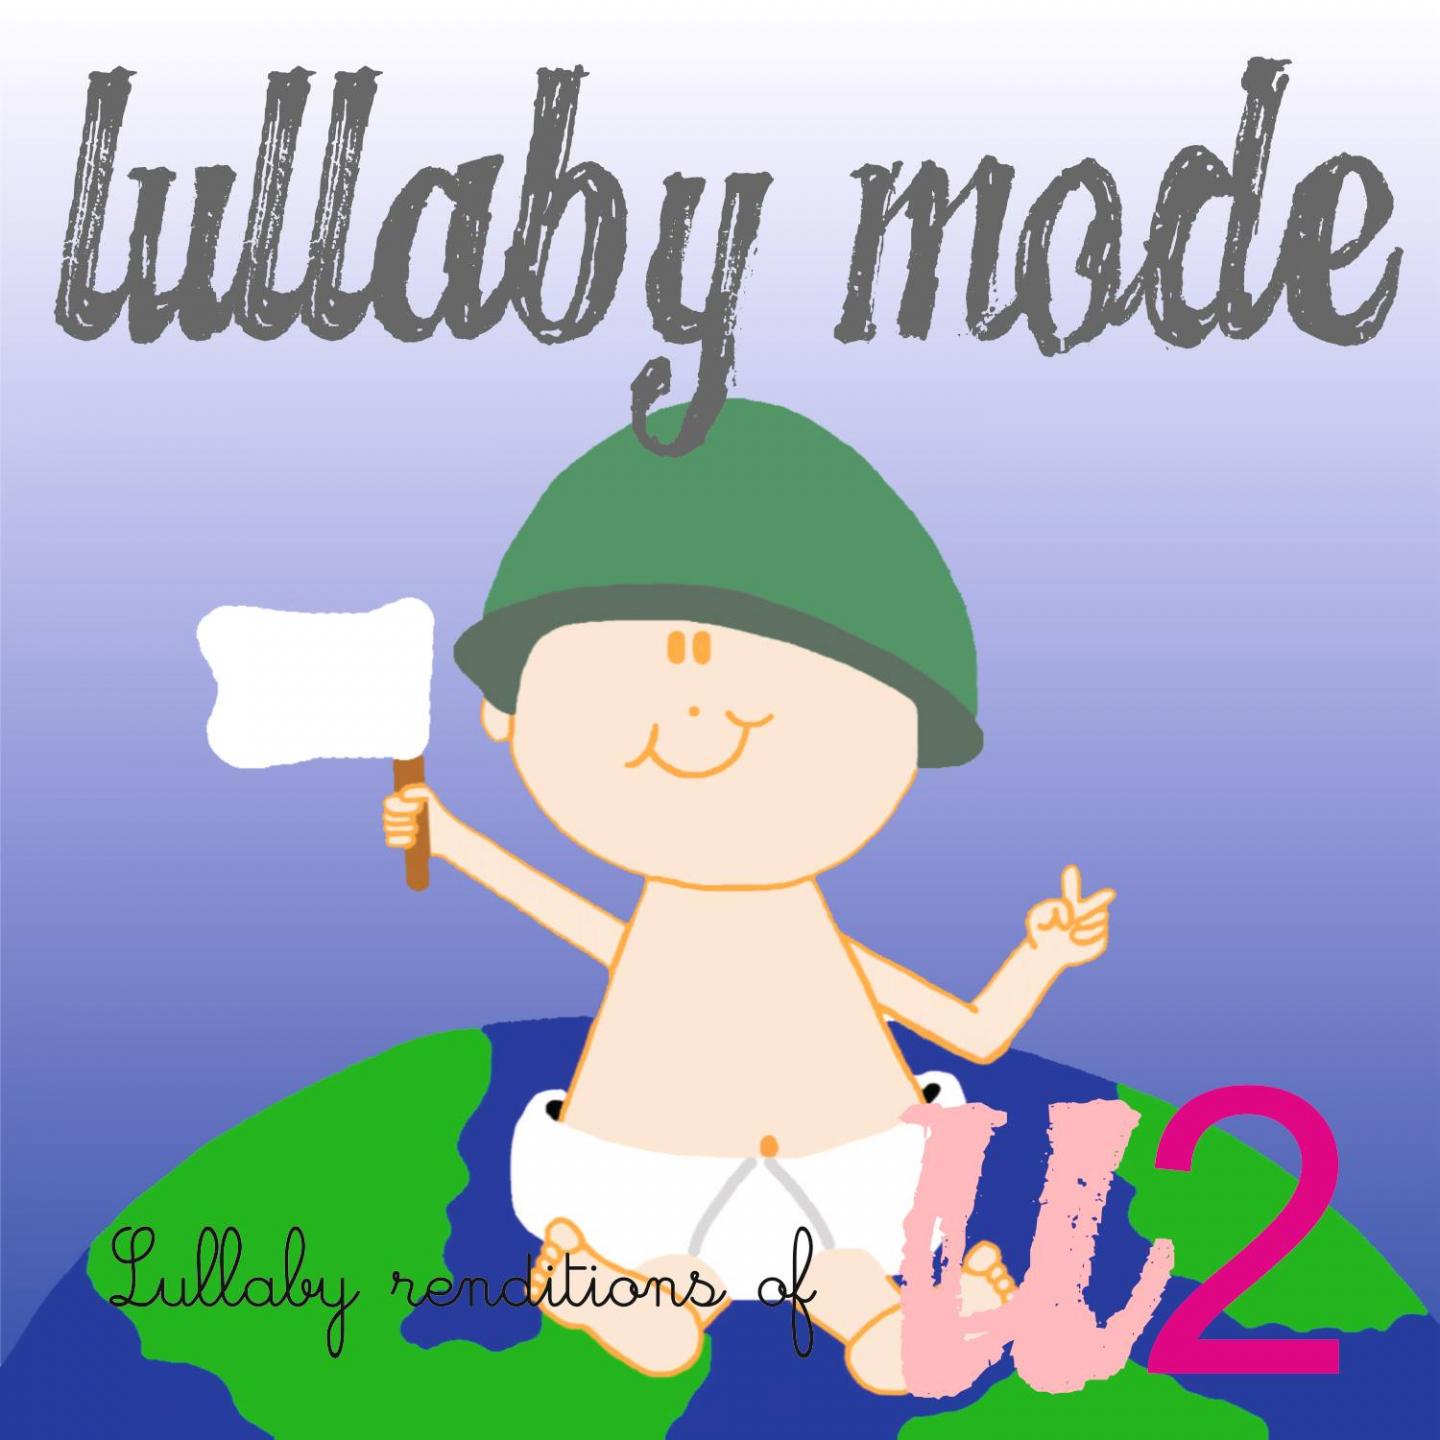 Bad (Lullaby Version)